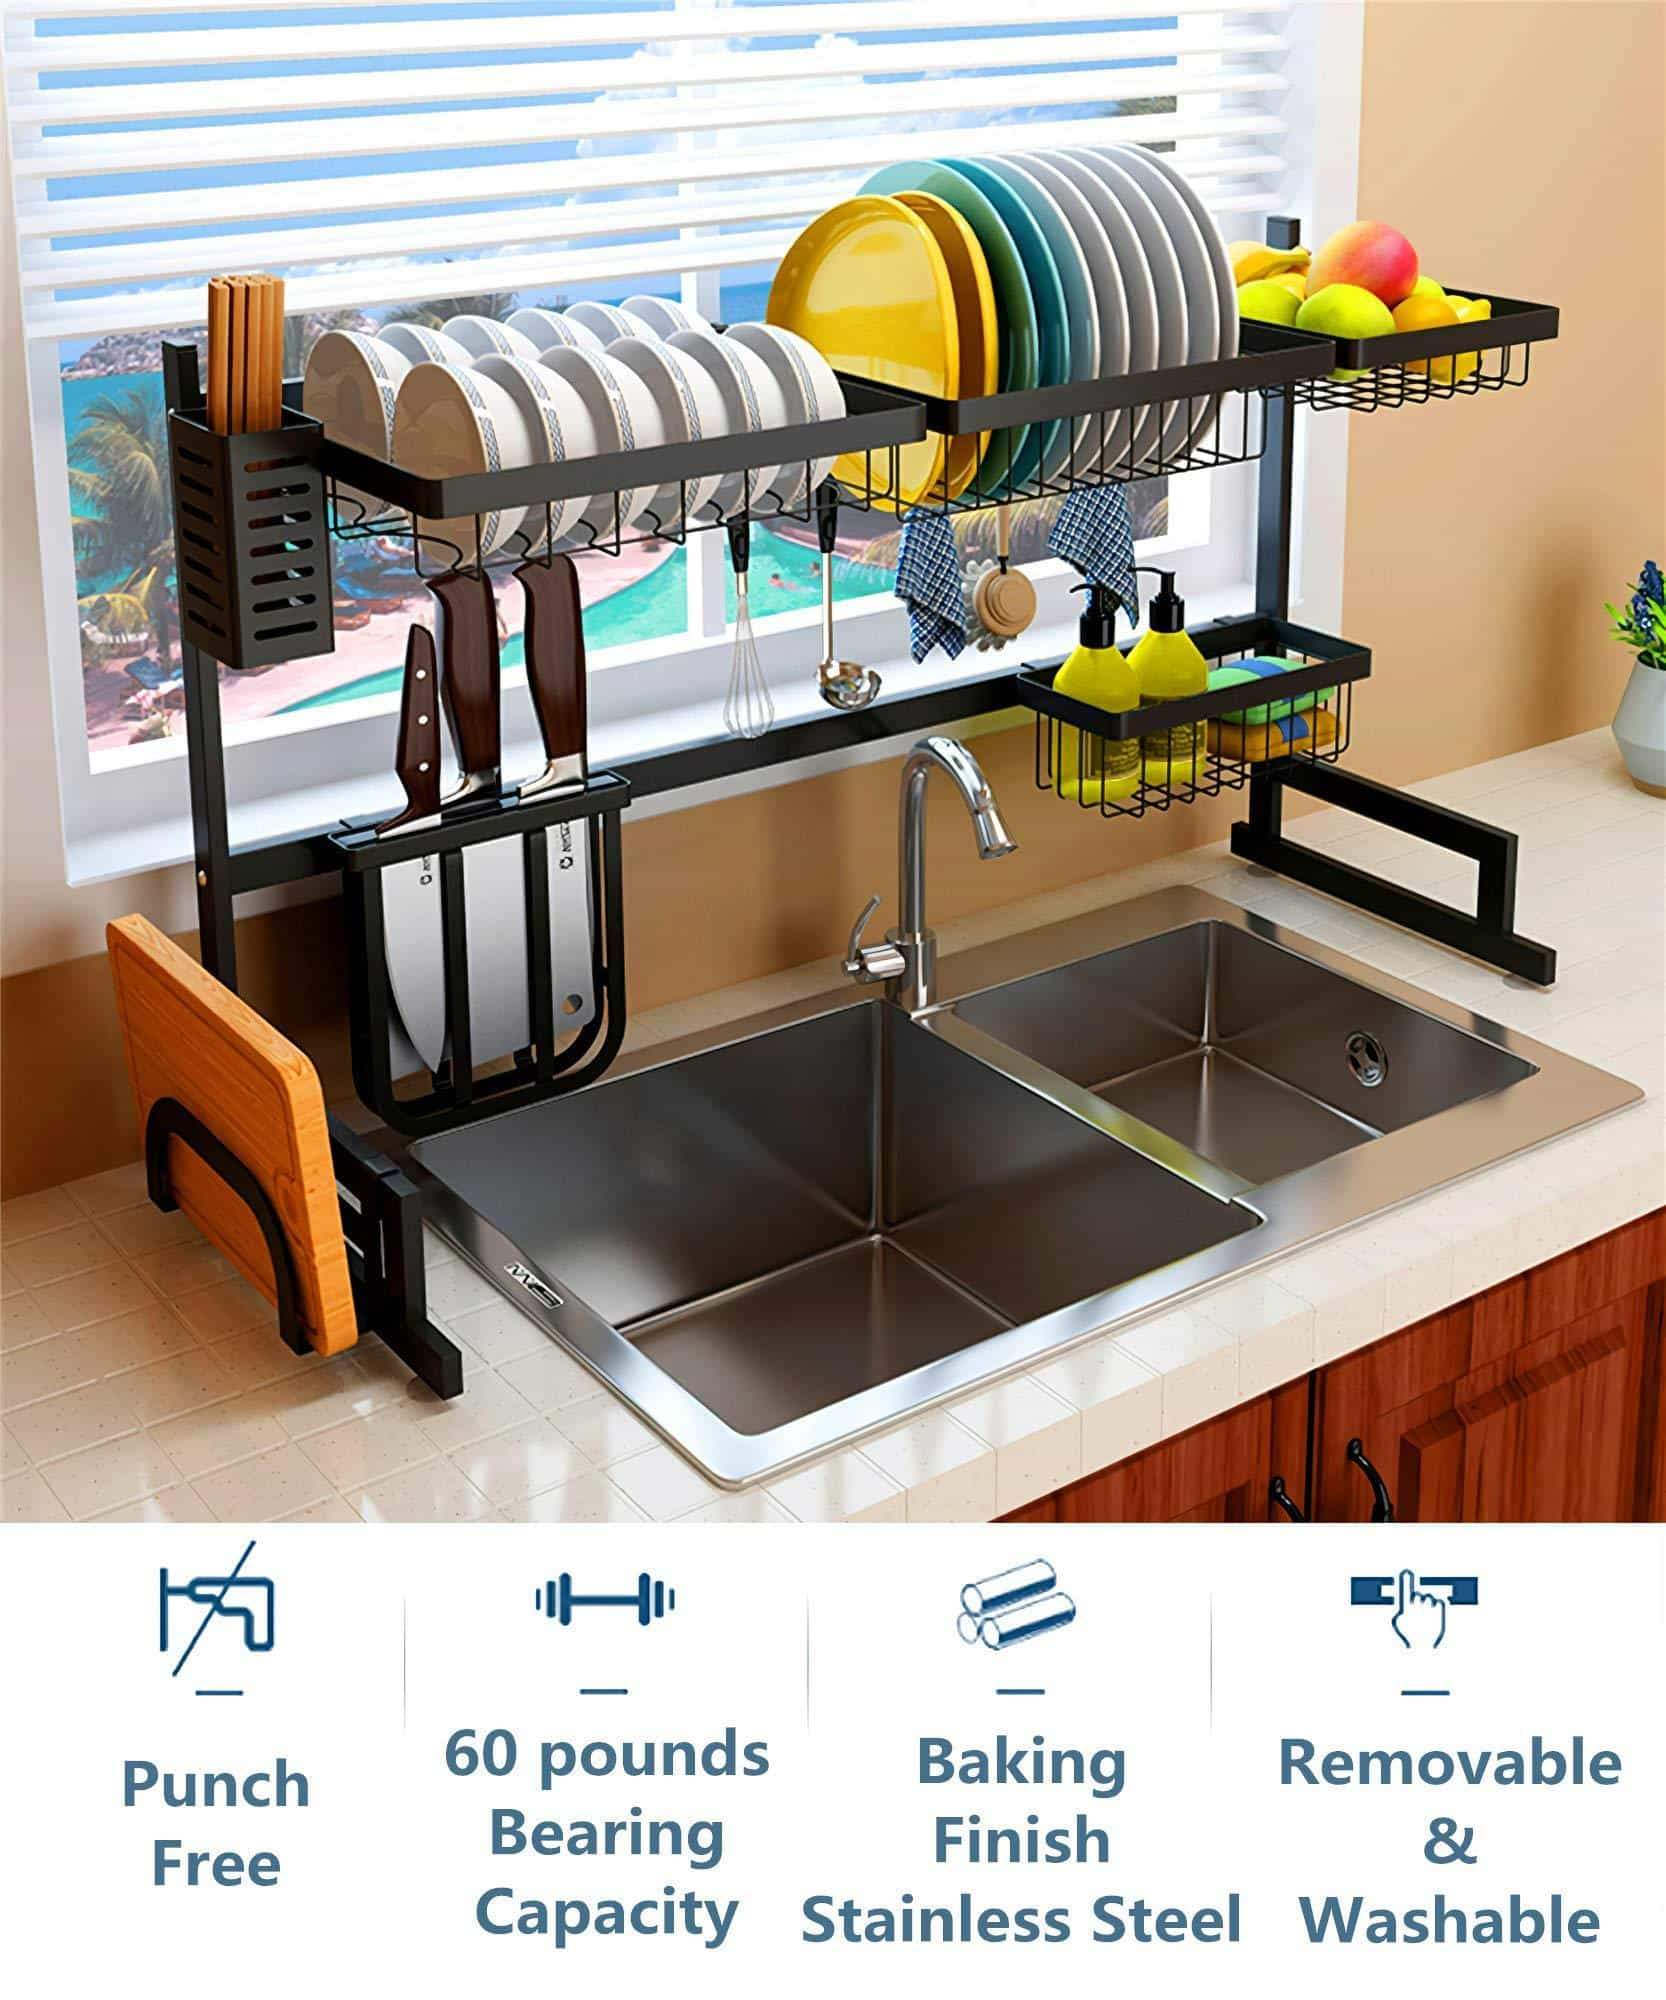 Order now over the sink dish drying rack 2 tier large 18 8 stainless steel drainer display shelf kitchen supplies storage accessories countertop space saver stand tableware organizer with utensil holder